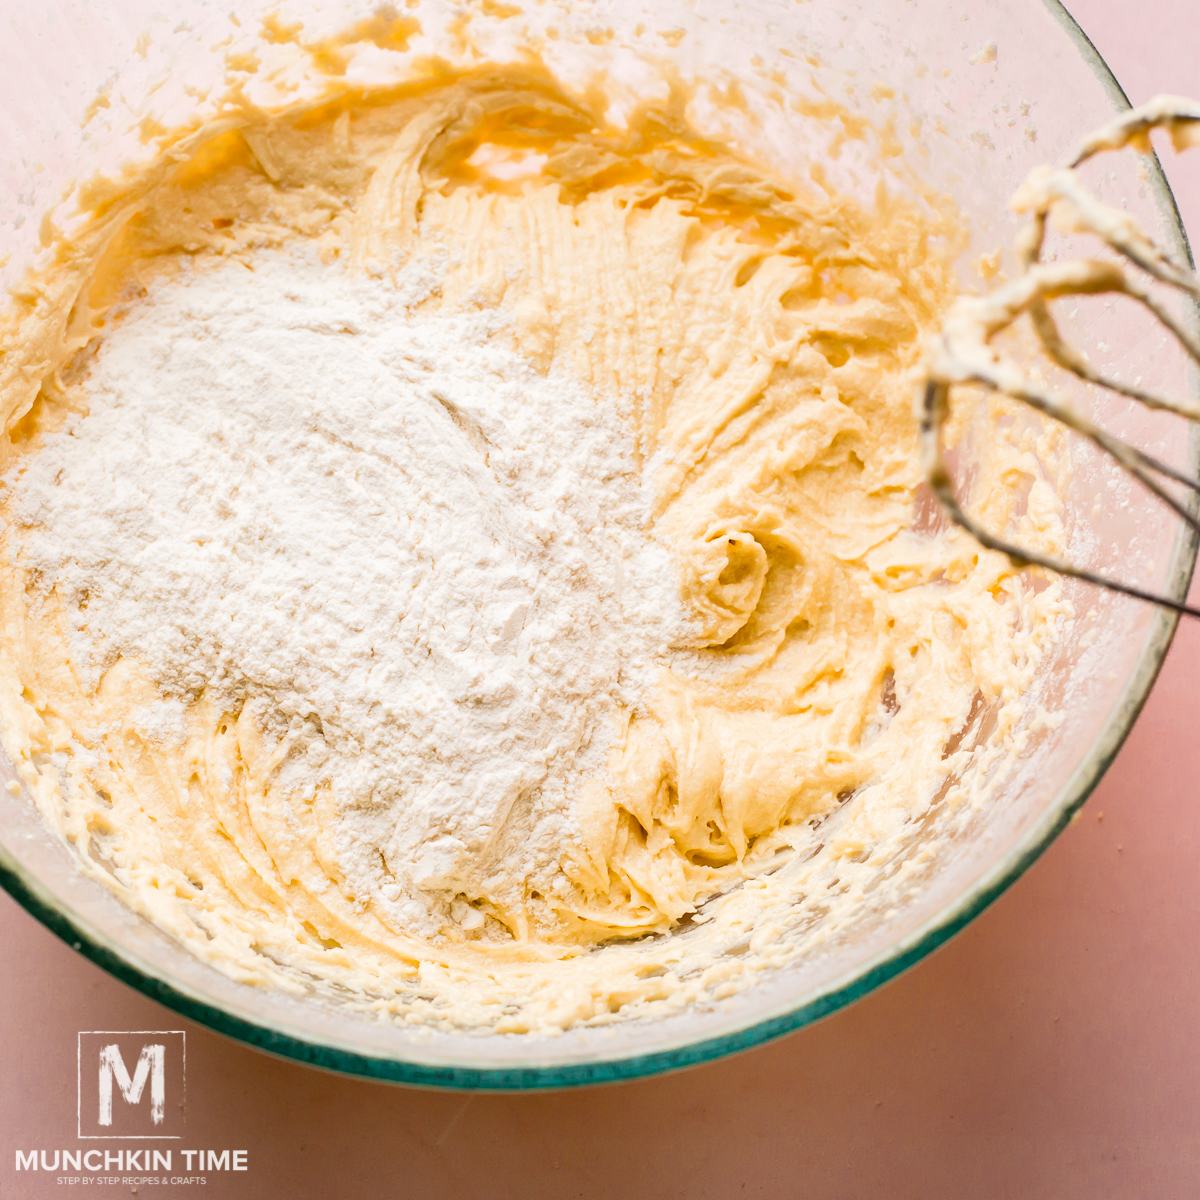 Add flour to the bowl of flour 1 cup at a time.